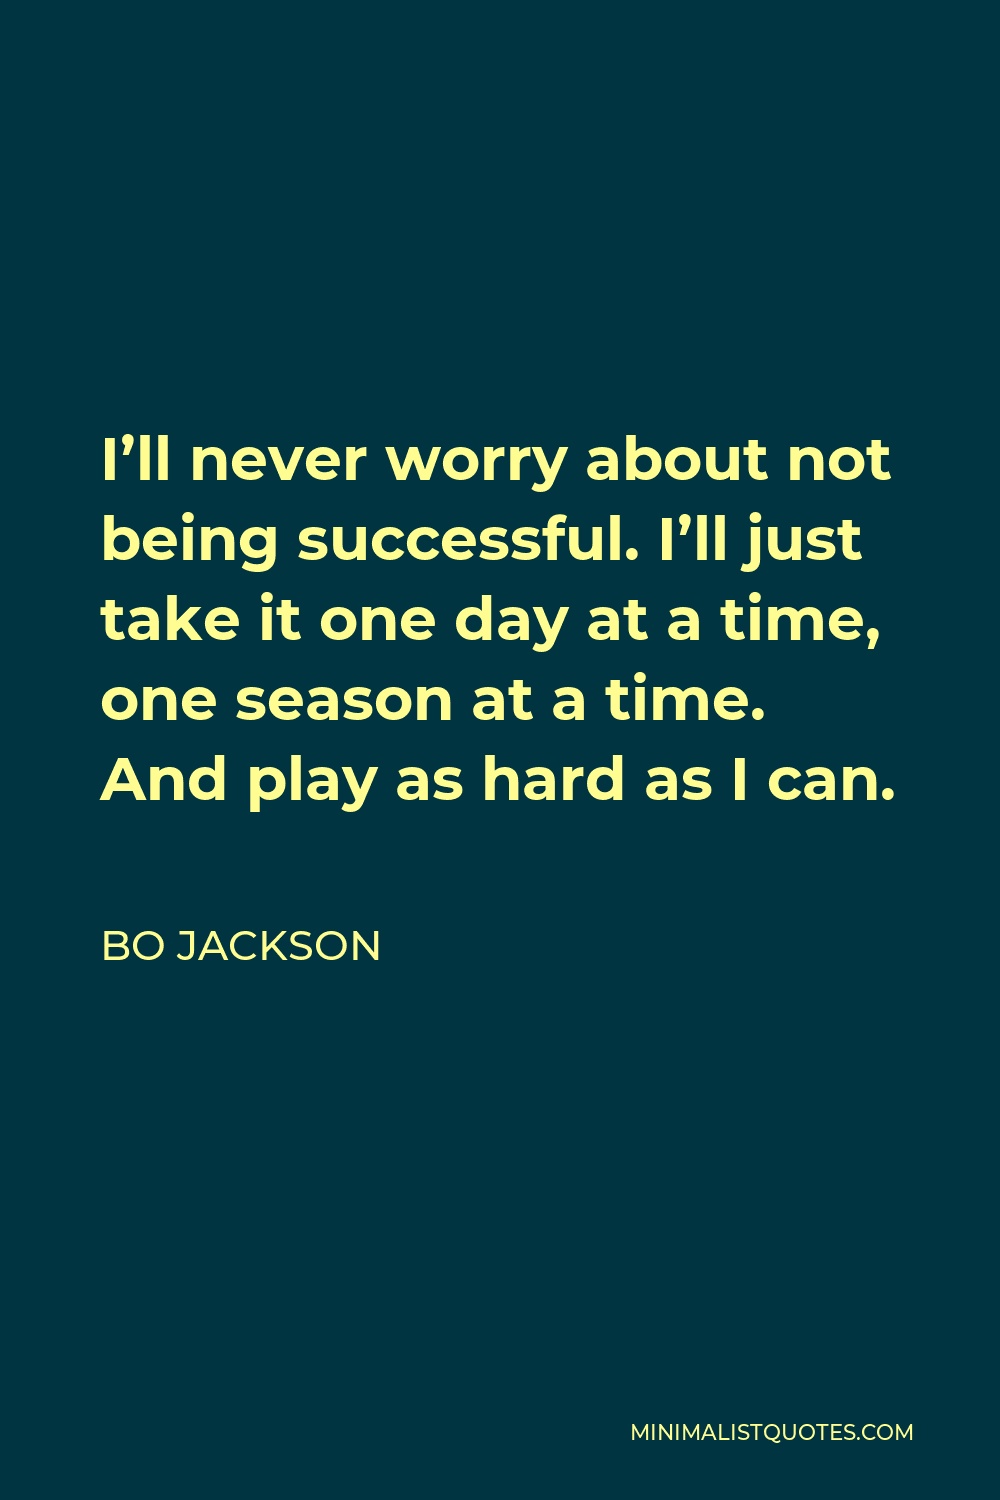 Bo Jackson Quote - I’ll never worry about not being successful. I’ll just take it one day at a time, one season at a time. And play as hard as I can.